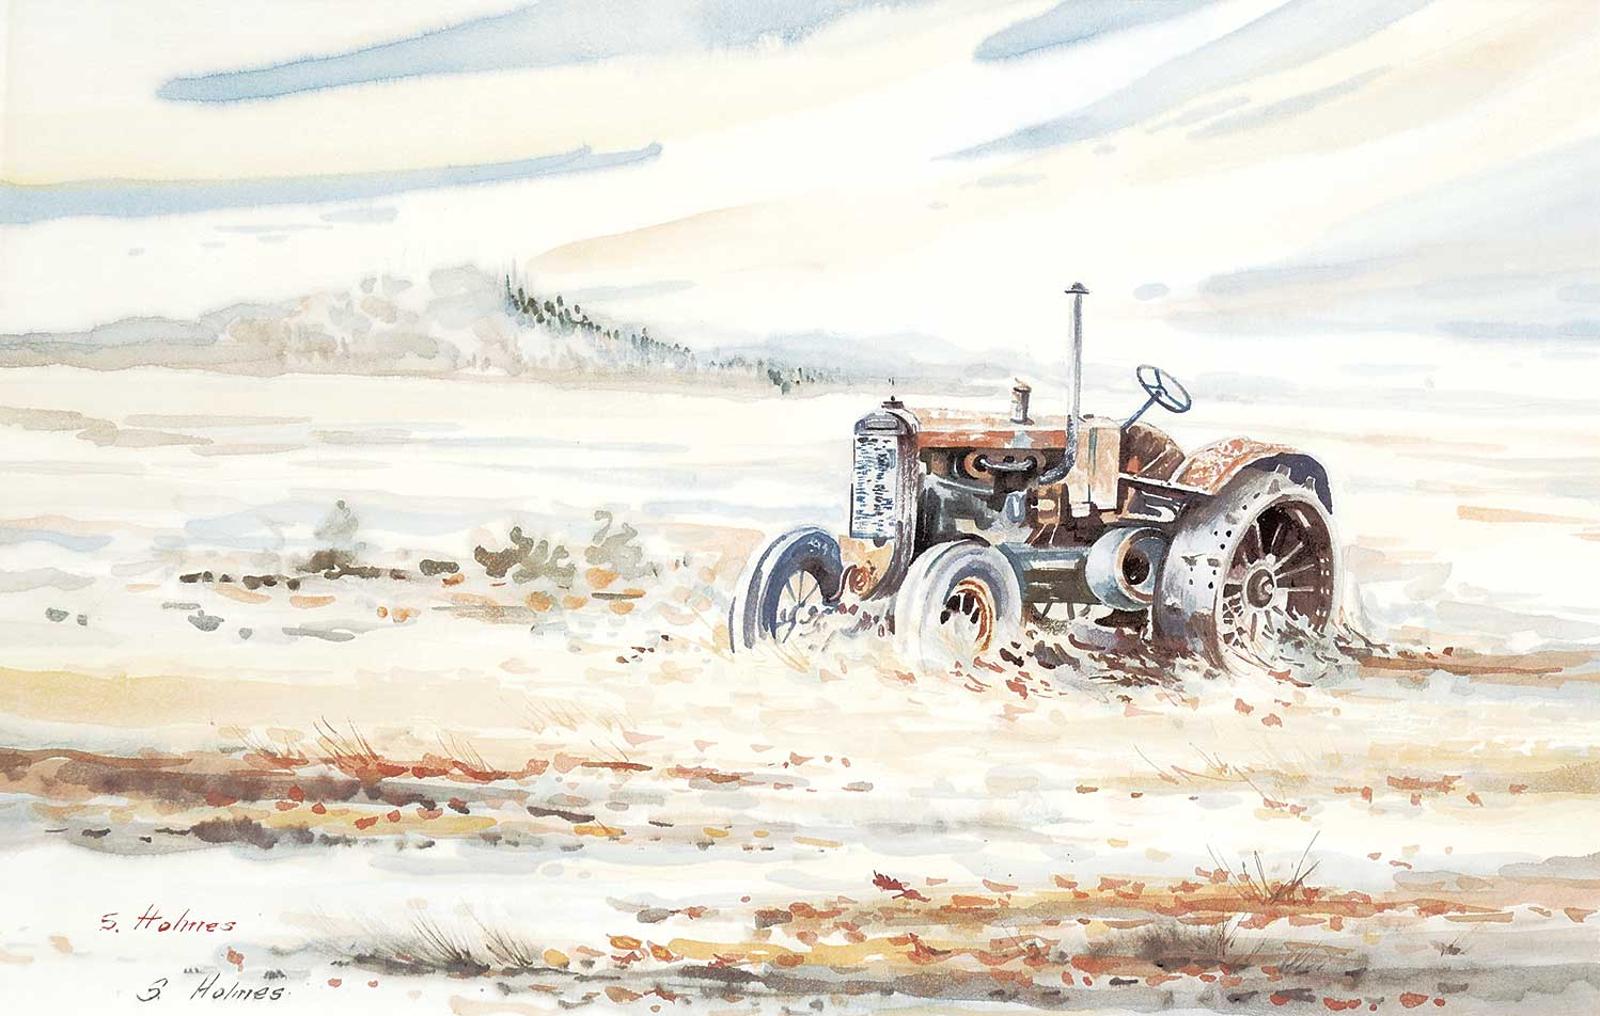 Sharon Christian Holmes - Untitled - The Old Tractor